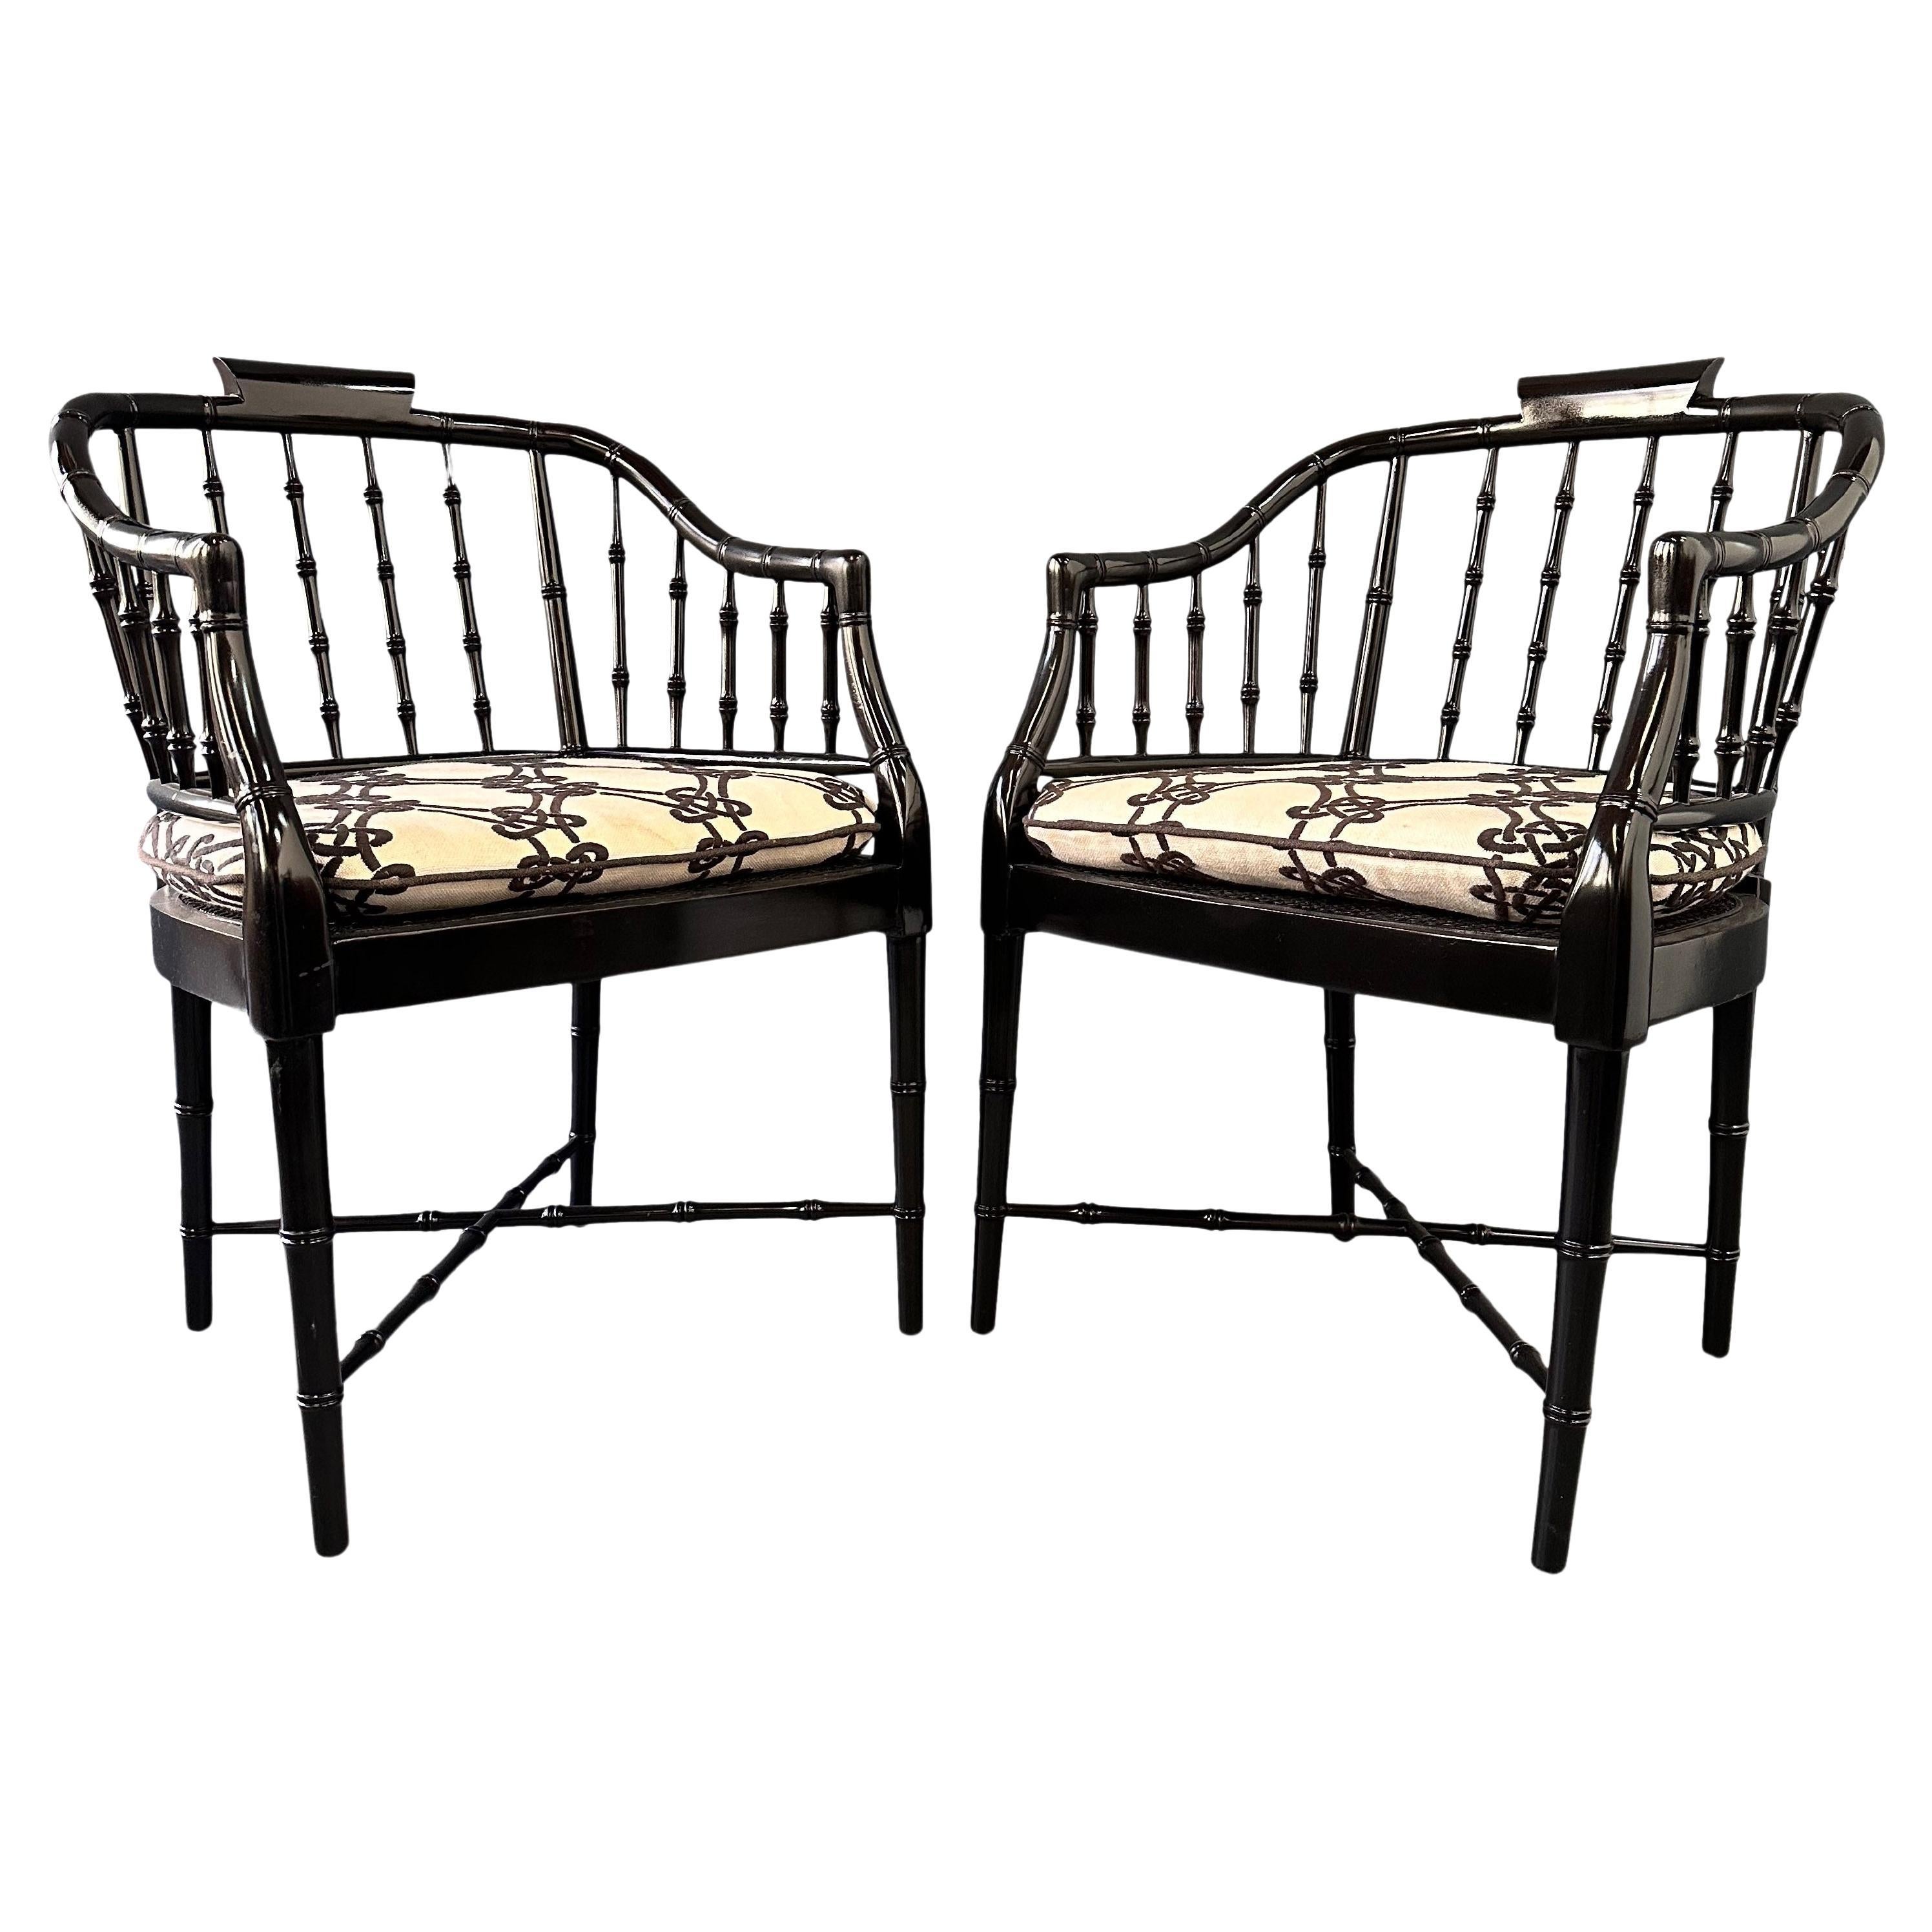 Pair of Chinoiserie Hollywood Regency Faux Bamboo Armchairs in Black by Baker For Sale